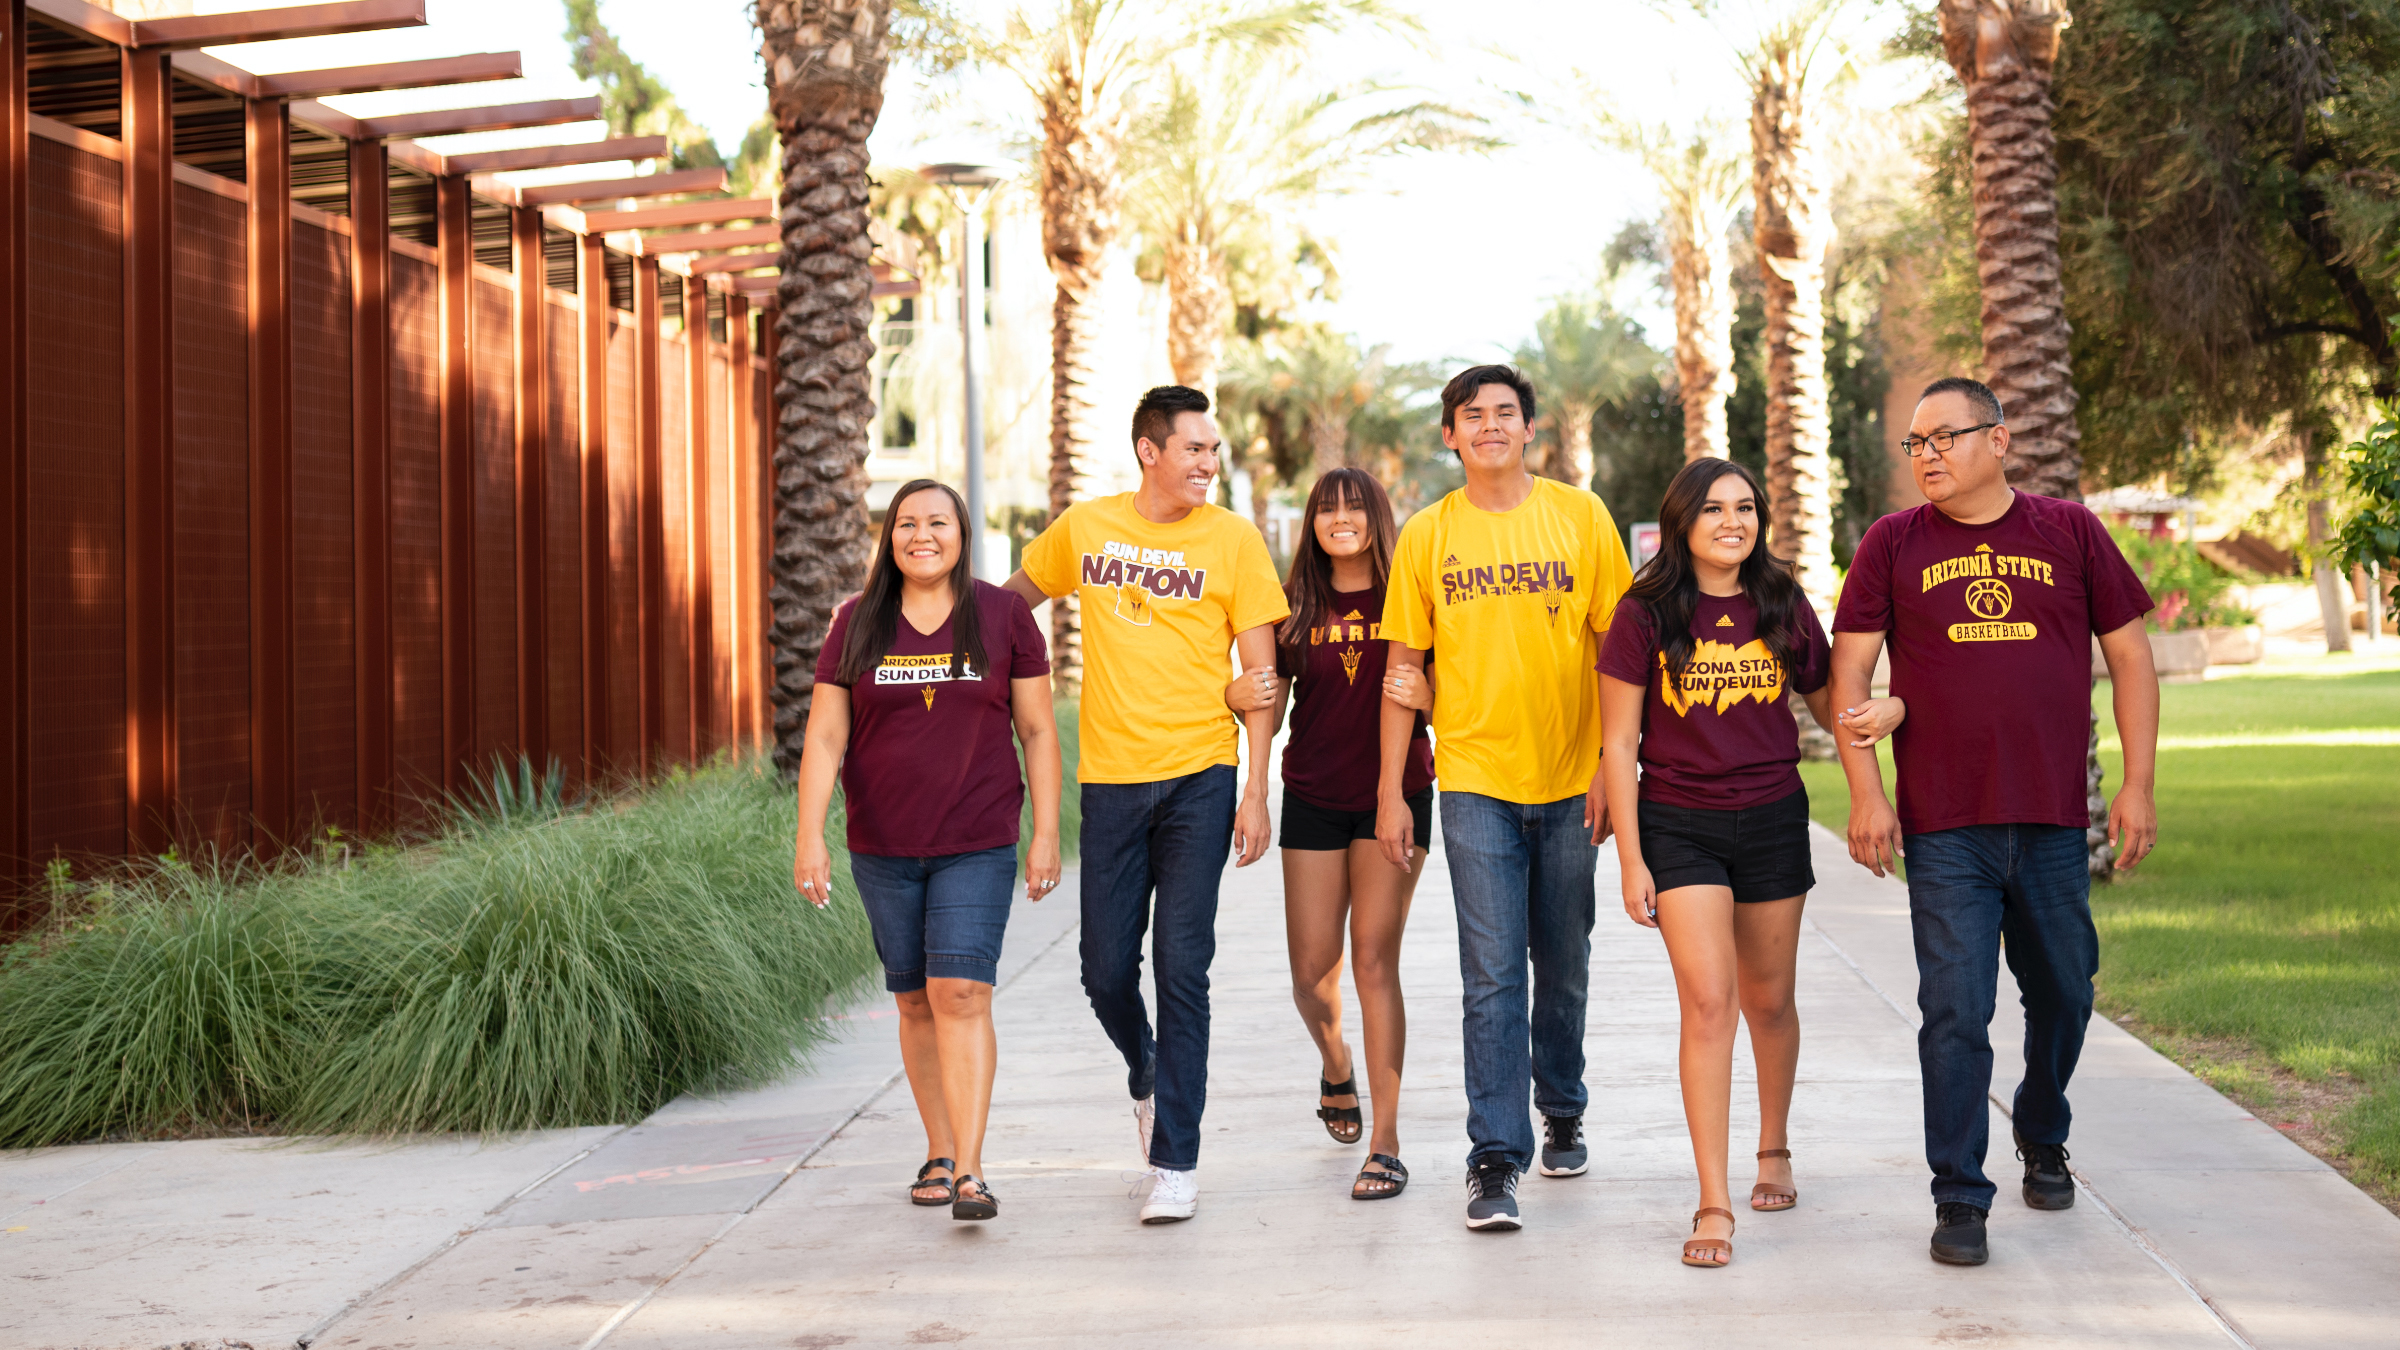 A legacy of giving back | ASU News